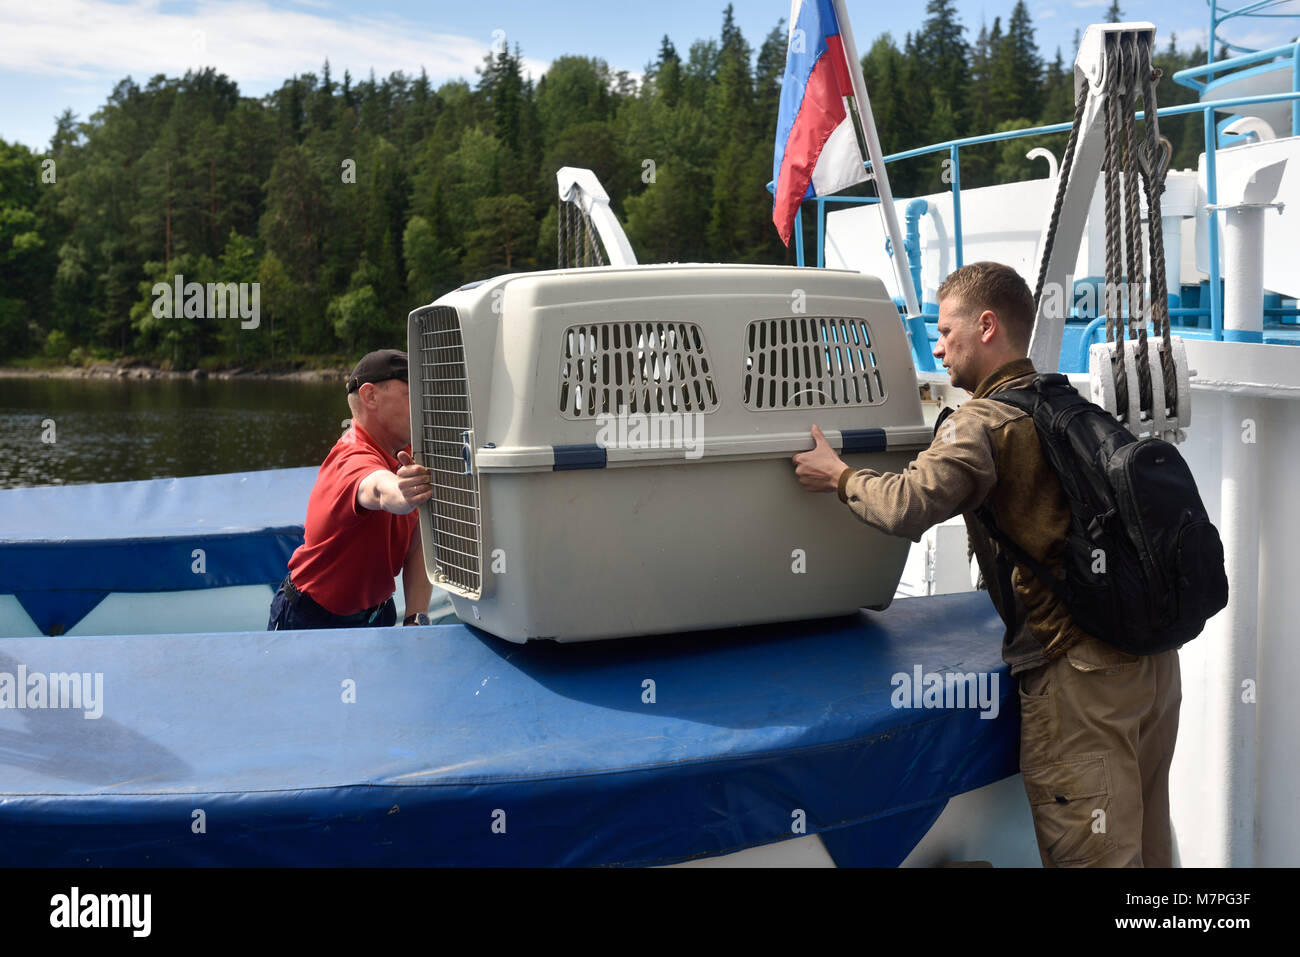 Valaam island, Russia - July 29, 2015: Vyacheslav Alekseev (right) and others carrying the cage with Ladoga ringed seal from the ship. Animals was cur Stock Photo